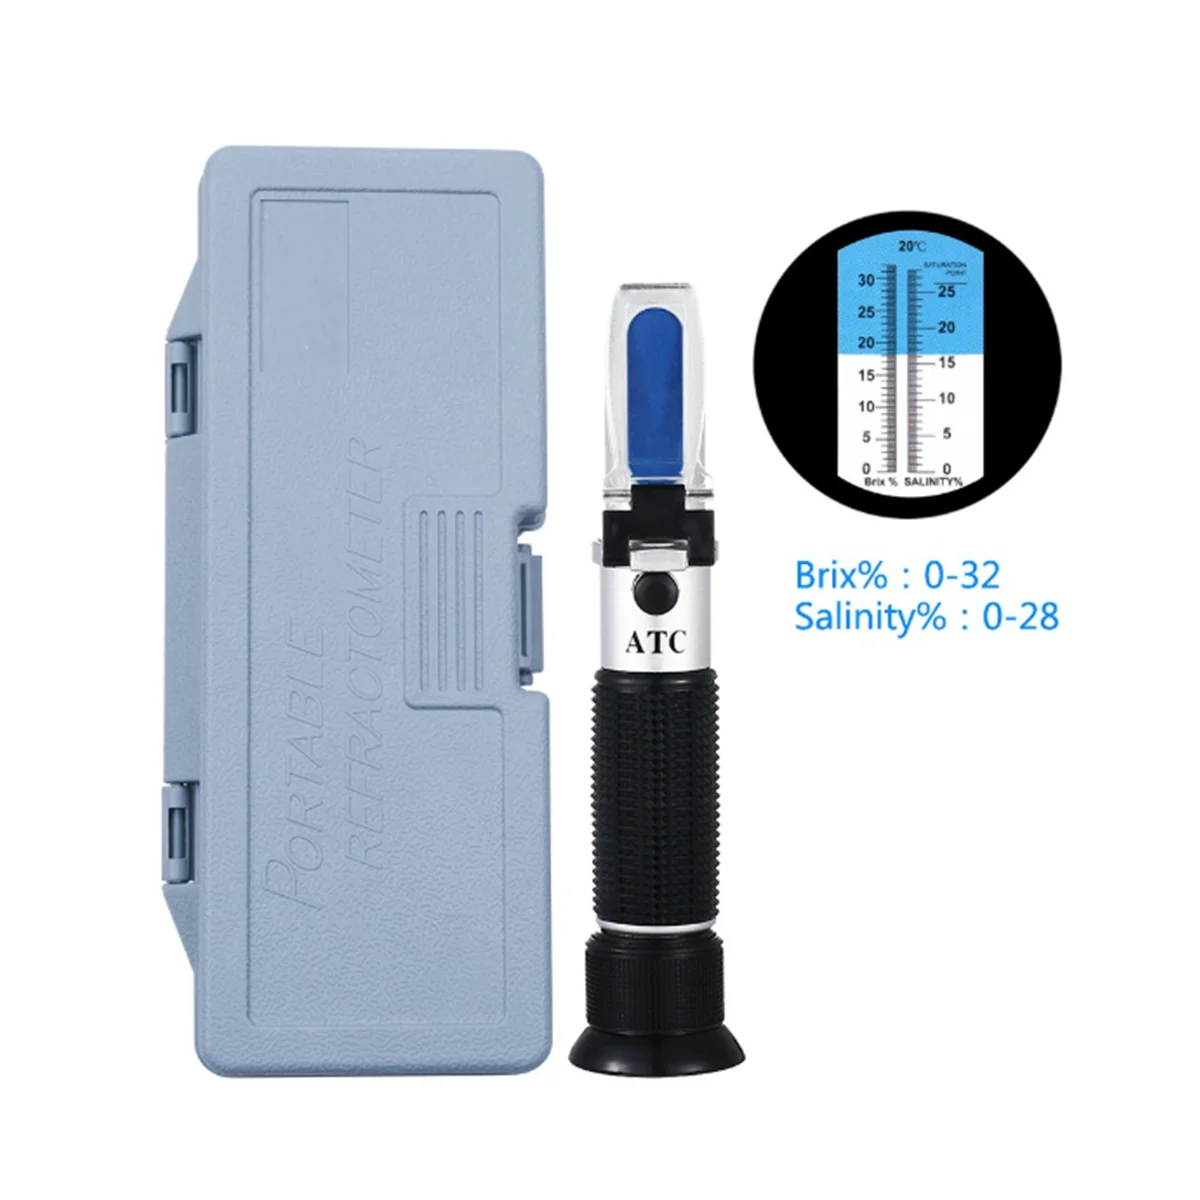 

Brix Refractometer with ATC Dual Scale - Specific Gravity & Brix Hydrometer in Wine Making and Beer Brewing Homebrew Kit